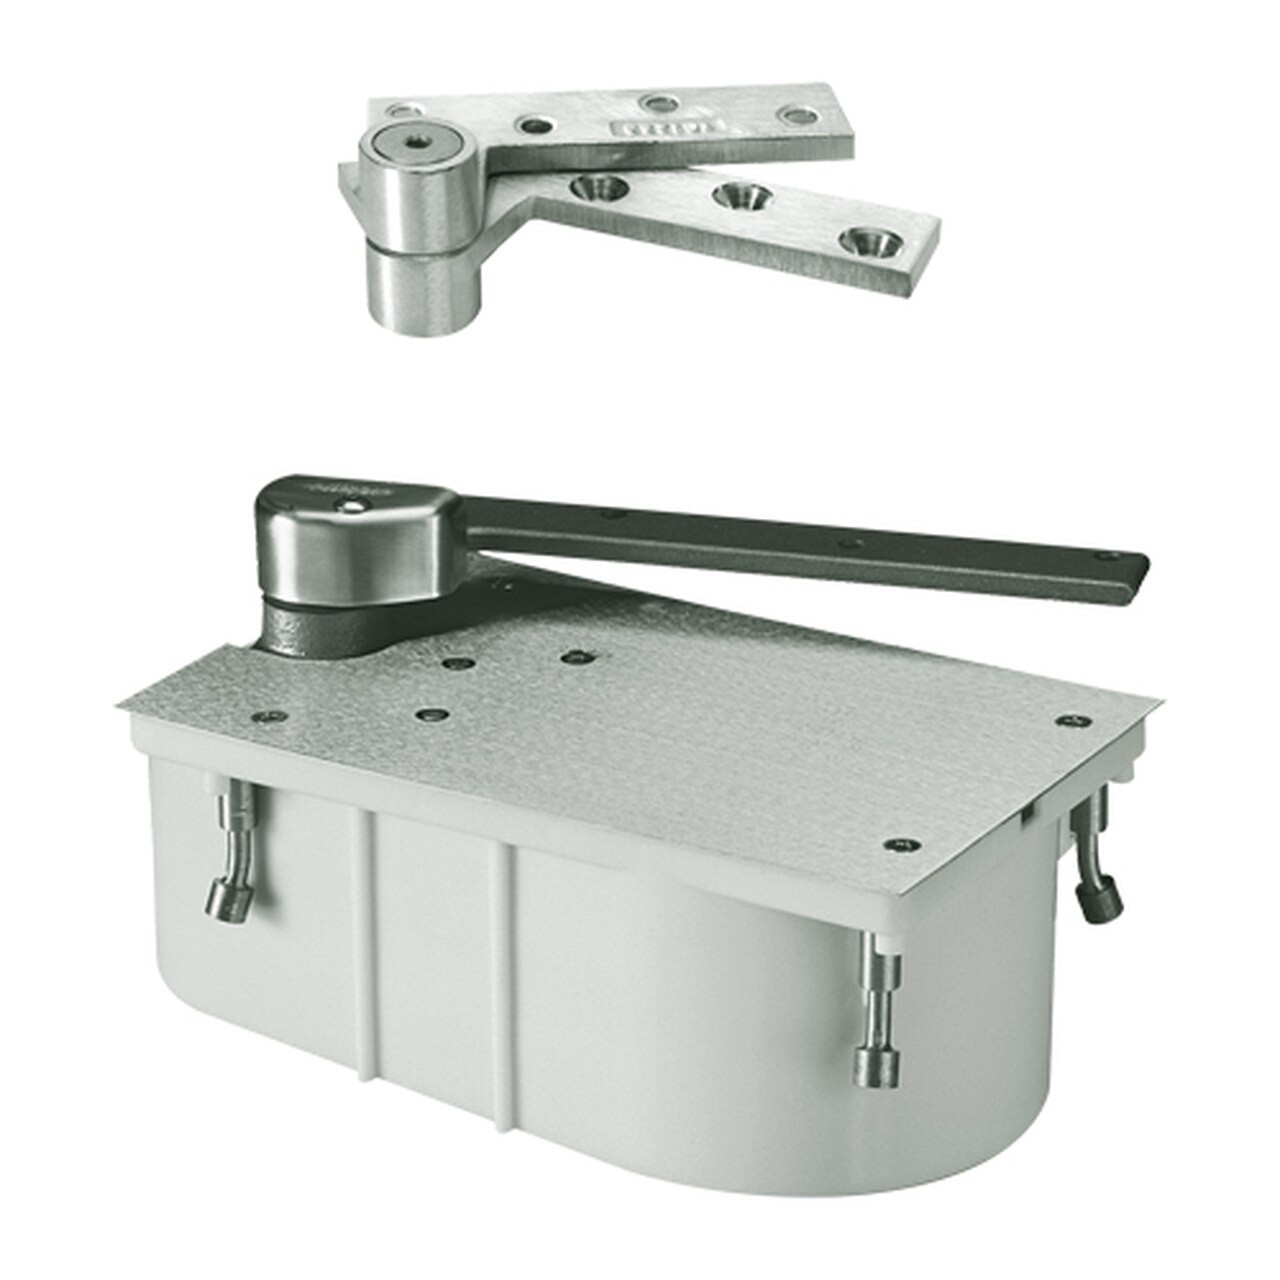 F27-90N-LFP-CWF-RH-619 Rixson 27 Series Fire Rated Heavy Duty 3/4" Offset Hung Floor Closer in Satin Nickel Finish